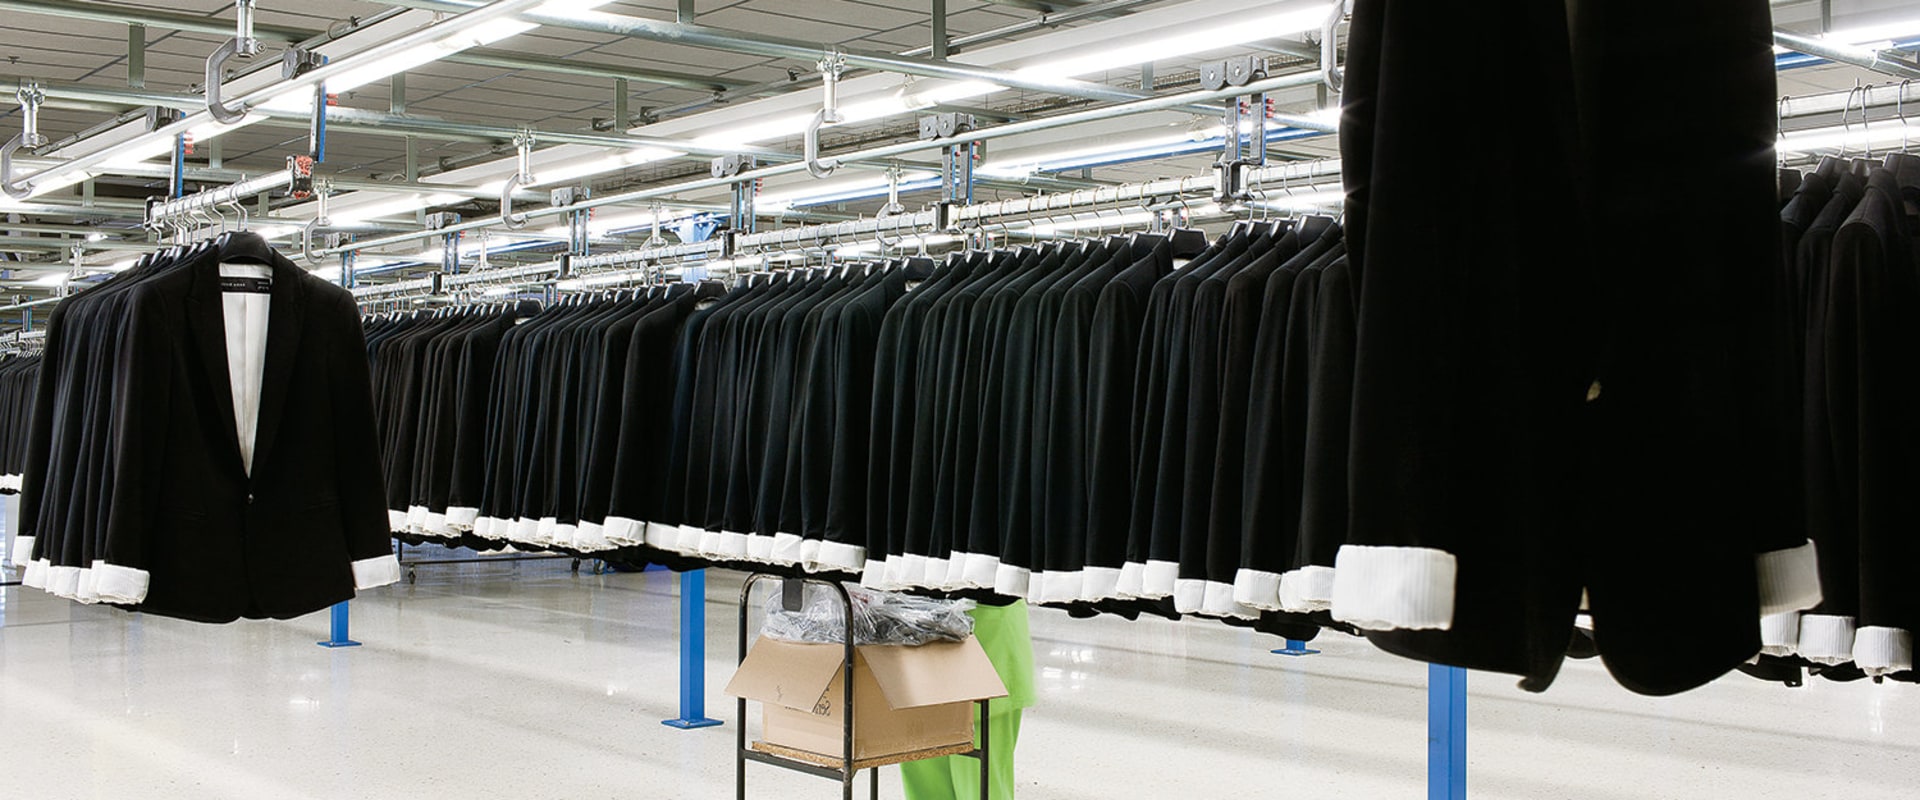 Who is the second largest clothing retailer in the world?